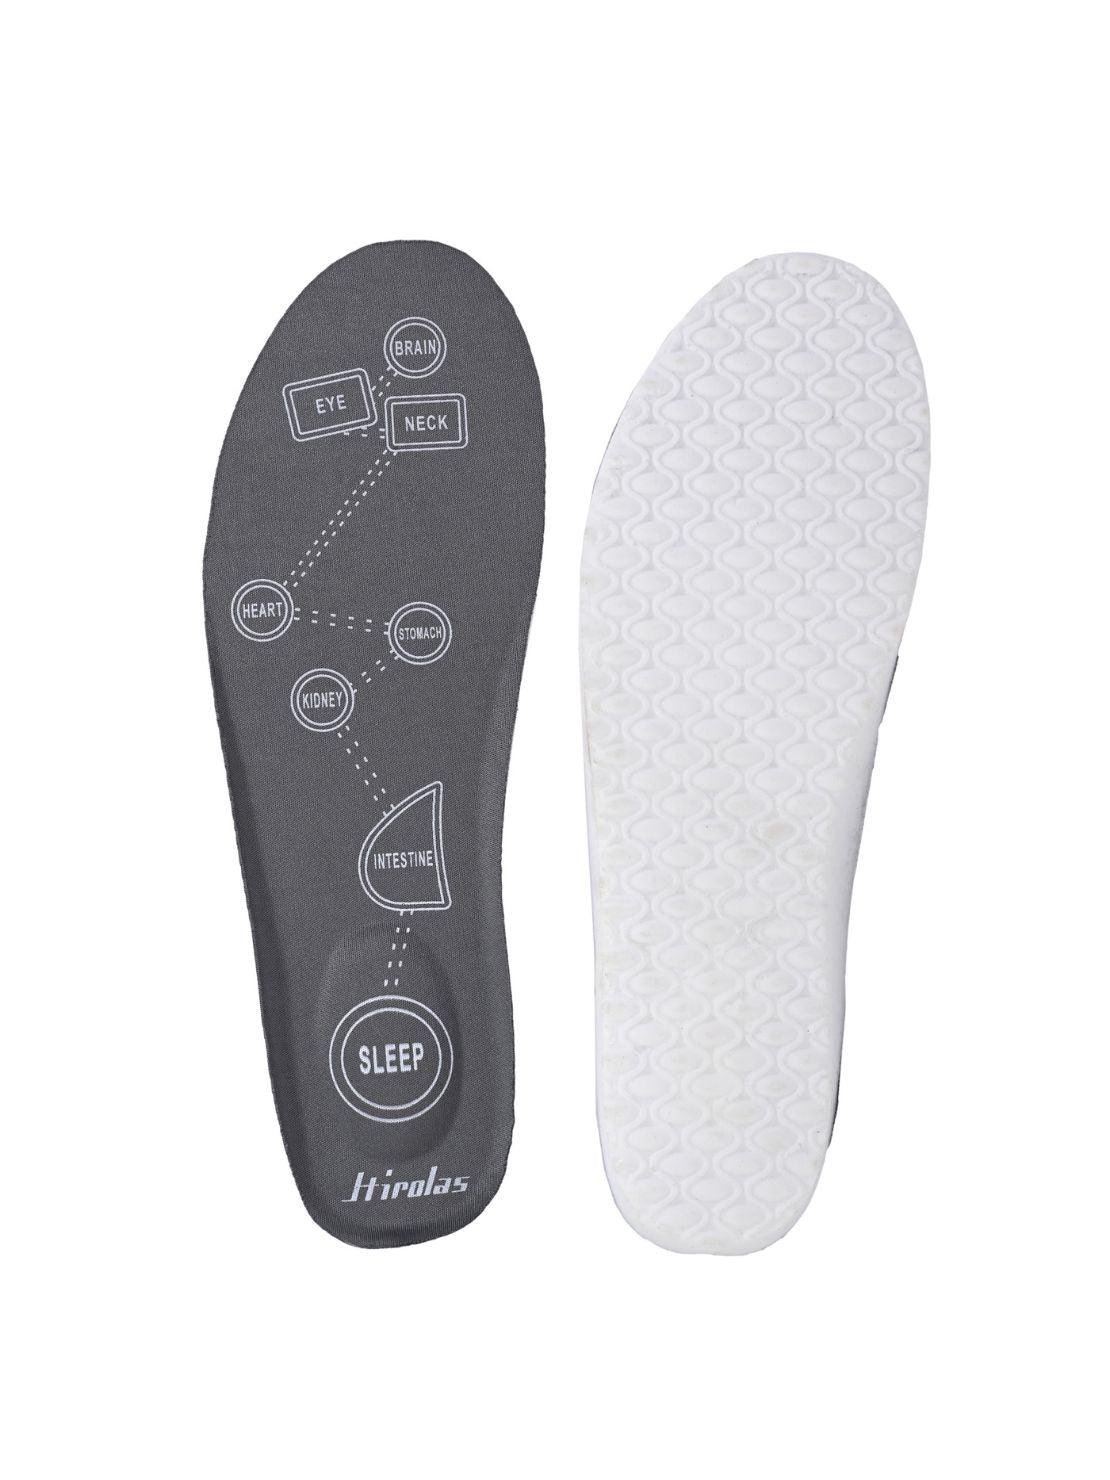 3 Pairs) Shoe Insoles,Heel Insoles,Sponge Shoes Pads with Heel Grips  Inserts,Heel Cushions,High Heel Inserts Great for Loose Shoes, Metatarsal  or Arch Pain,Feet Sore Relief,Women 4.5-9.5. Women(4.5-9.5) Shoe Insole  With H